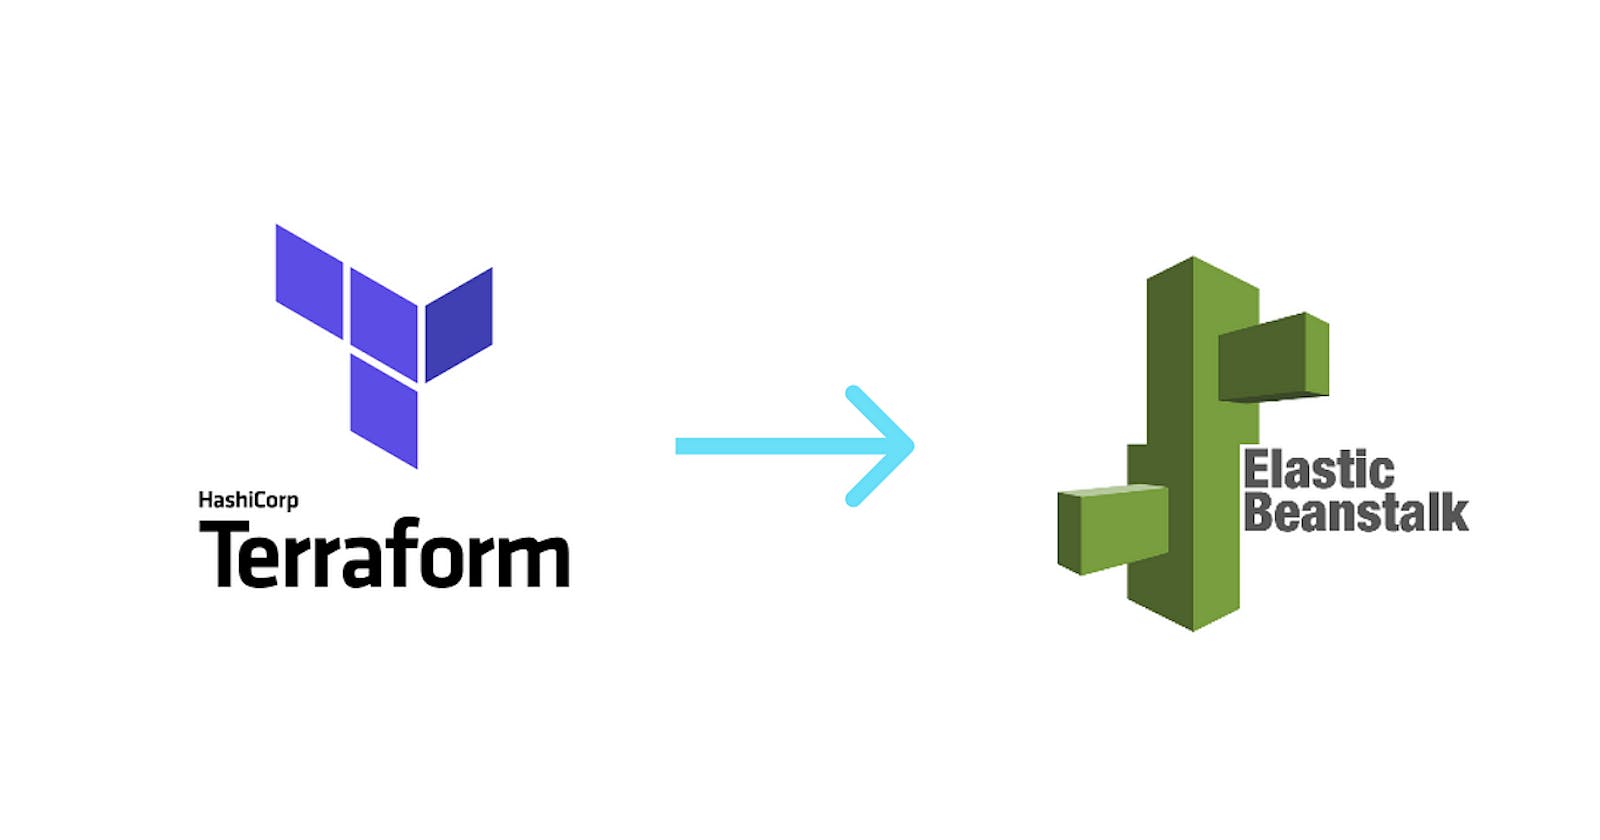 Getting Started with AWS Elastic Beanstalk and Terraform